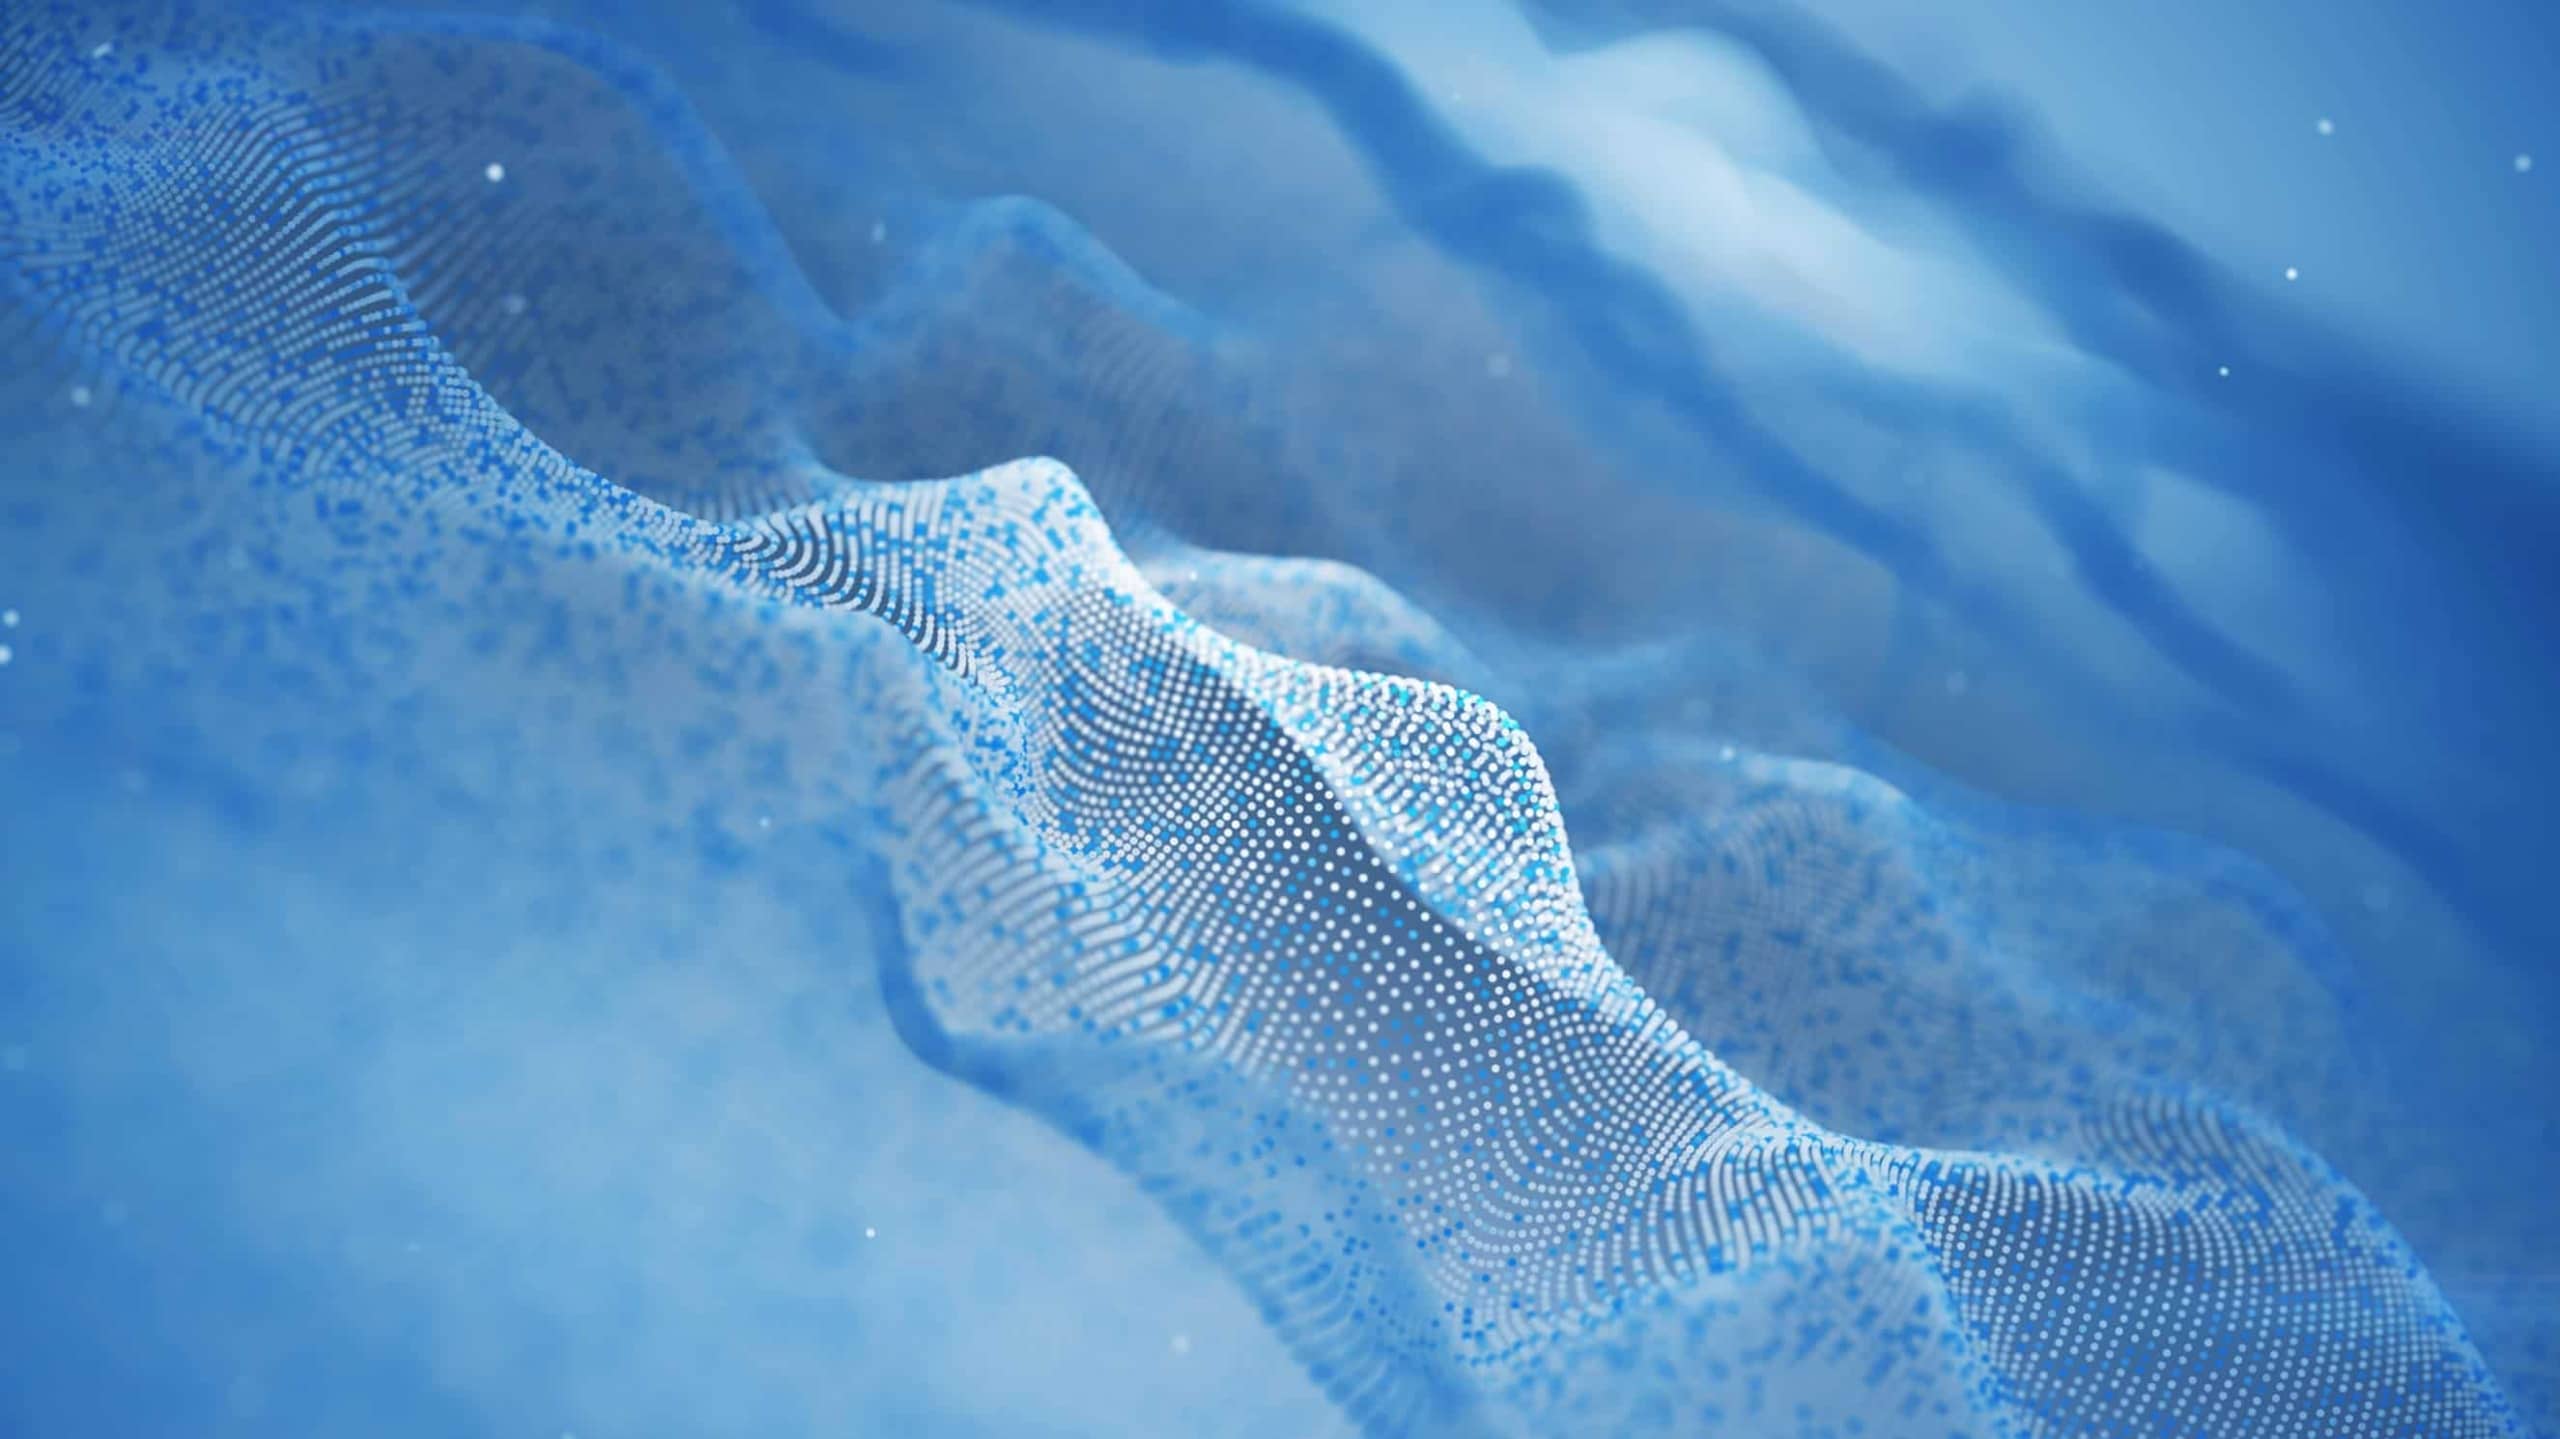 Abstract digital blue waves made of small particles, representing data flow or network connectivity, set against a soft blue background.